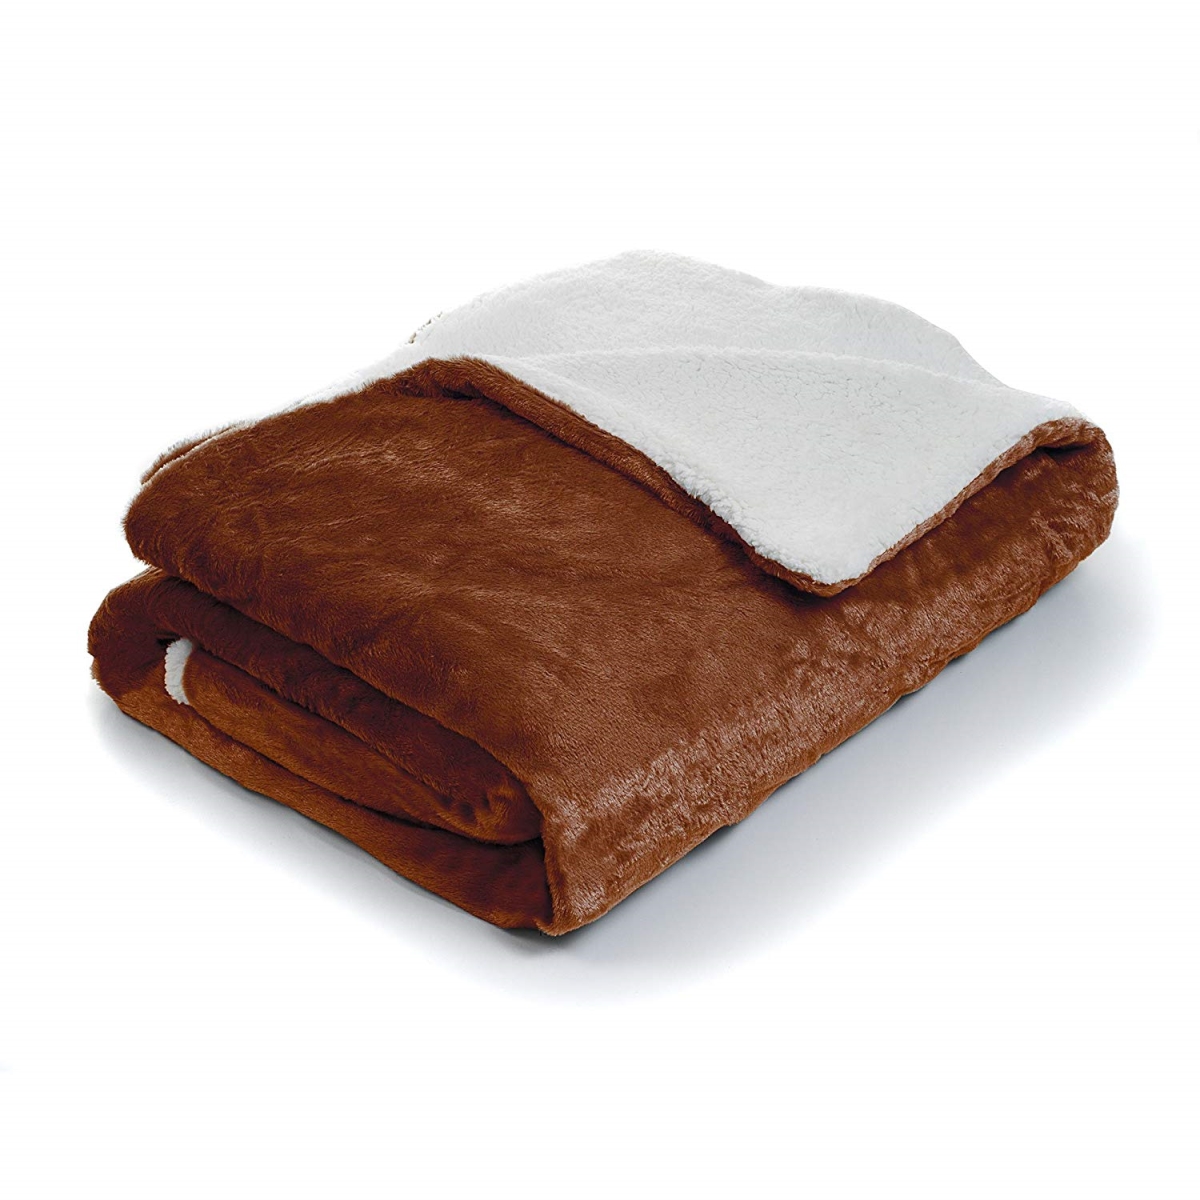 61a-06417 Fleece Blanket With Sherpa Backing, King Size - Brown